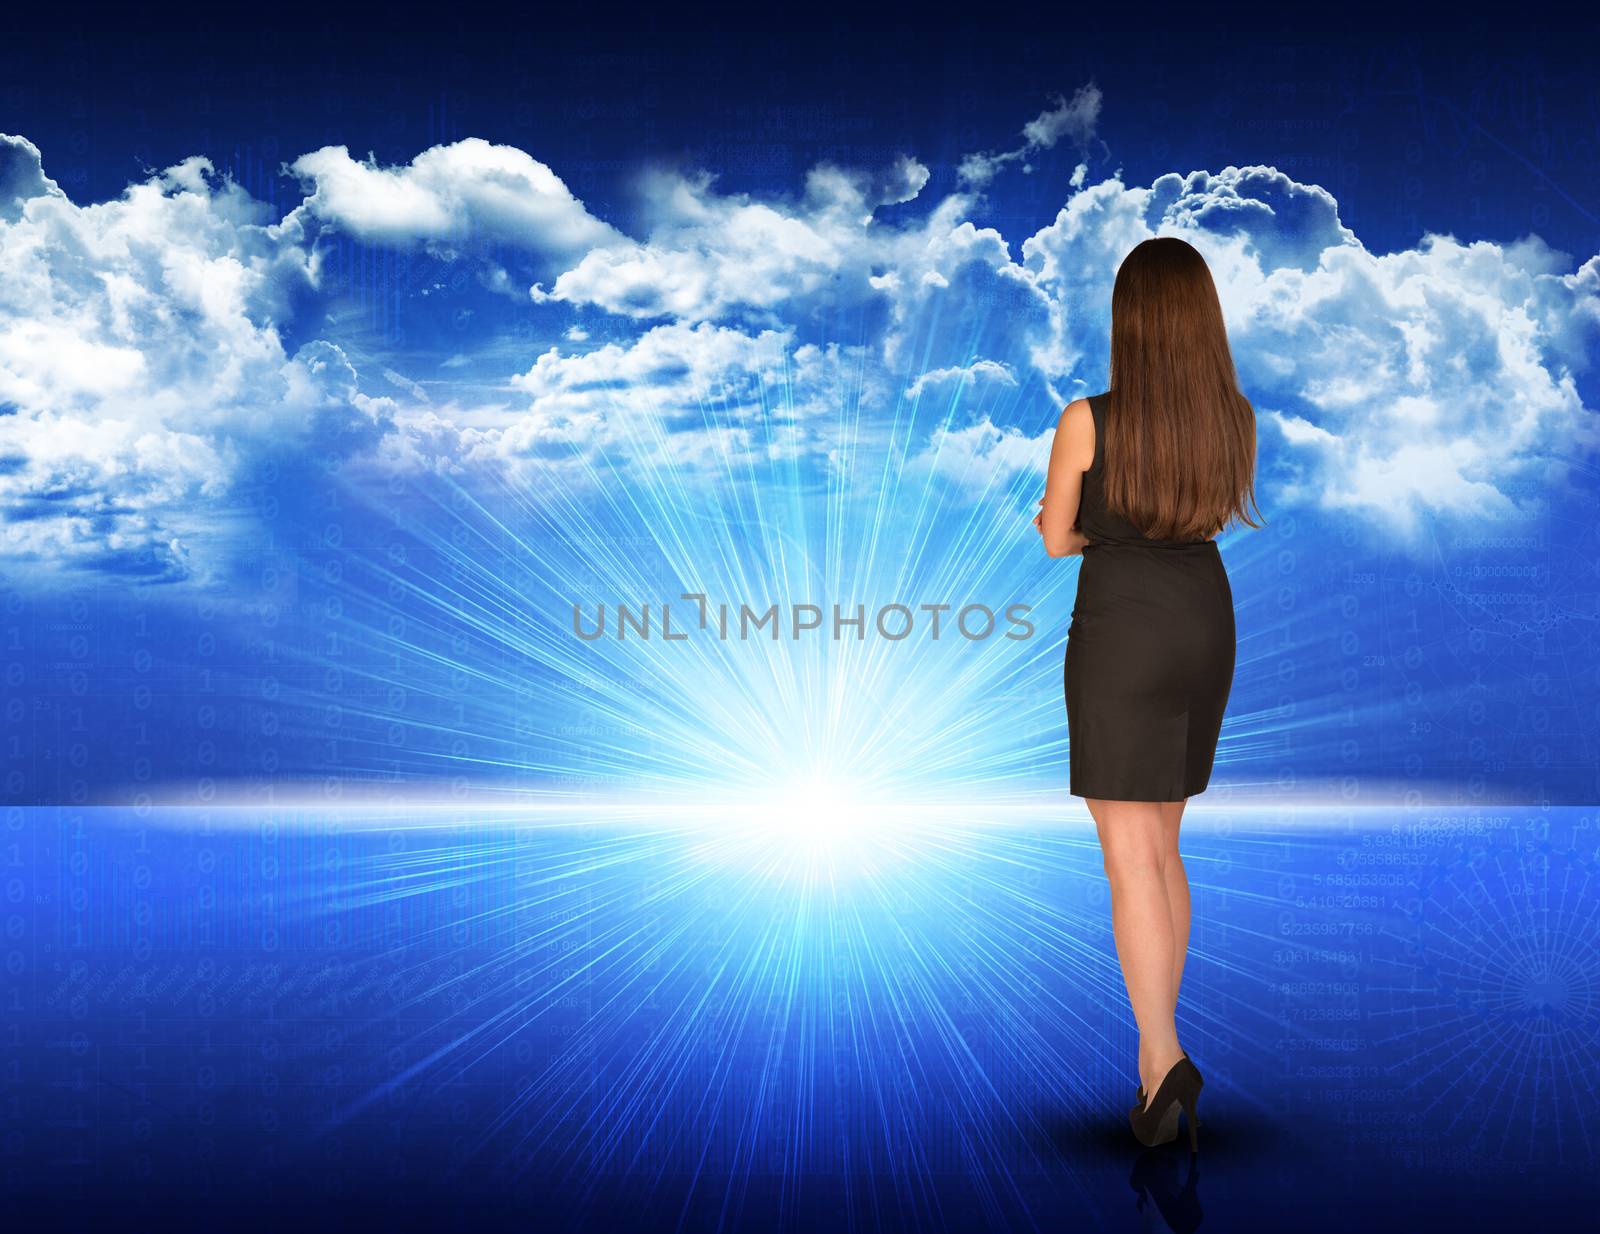 Businesswoman standing against digitally generated spacy blue landscape with rising sun and cloudy sky